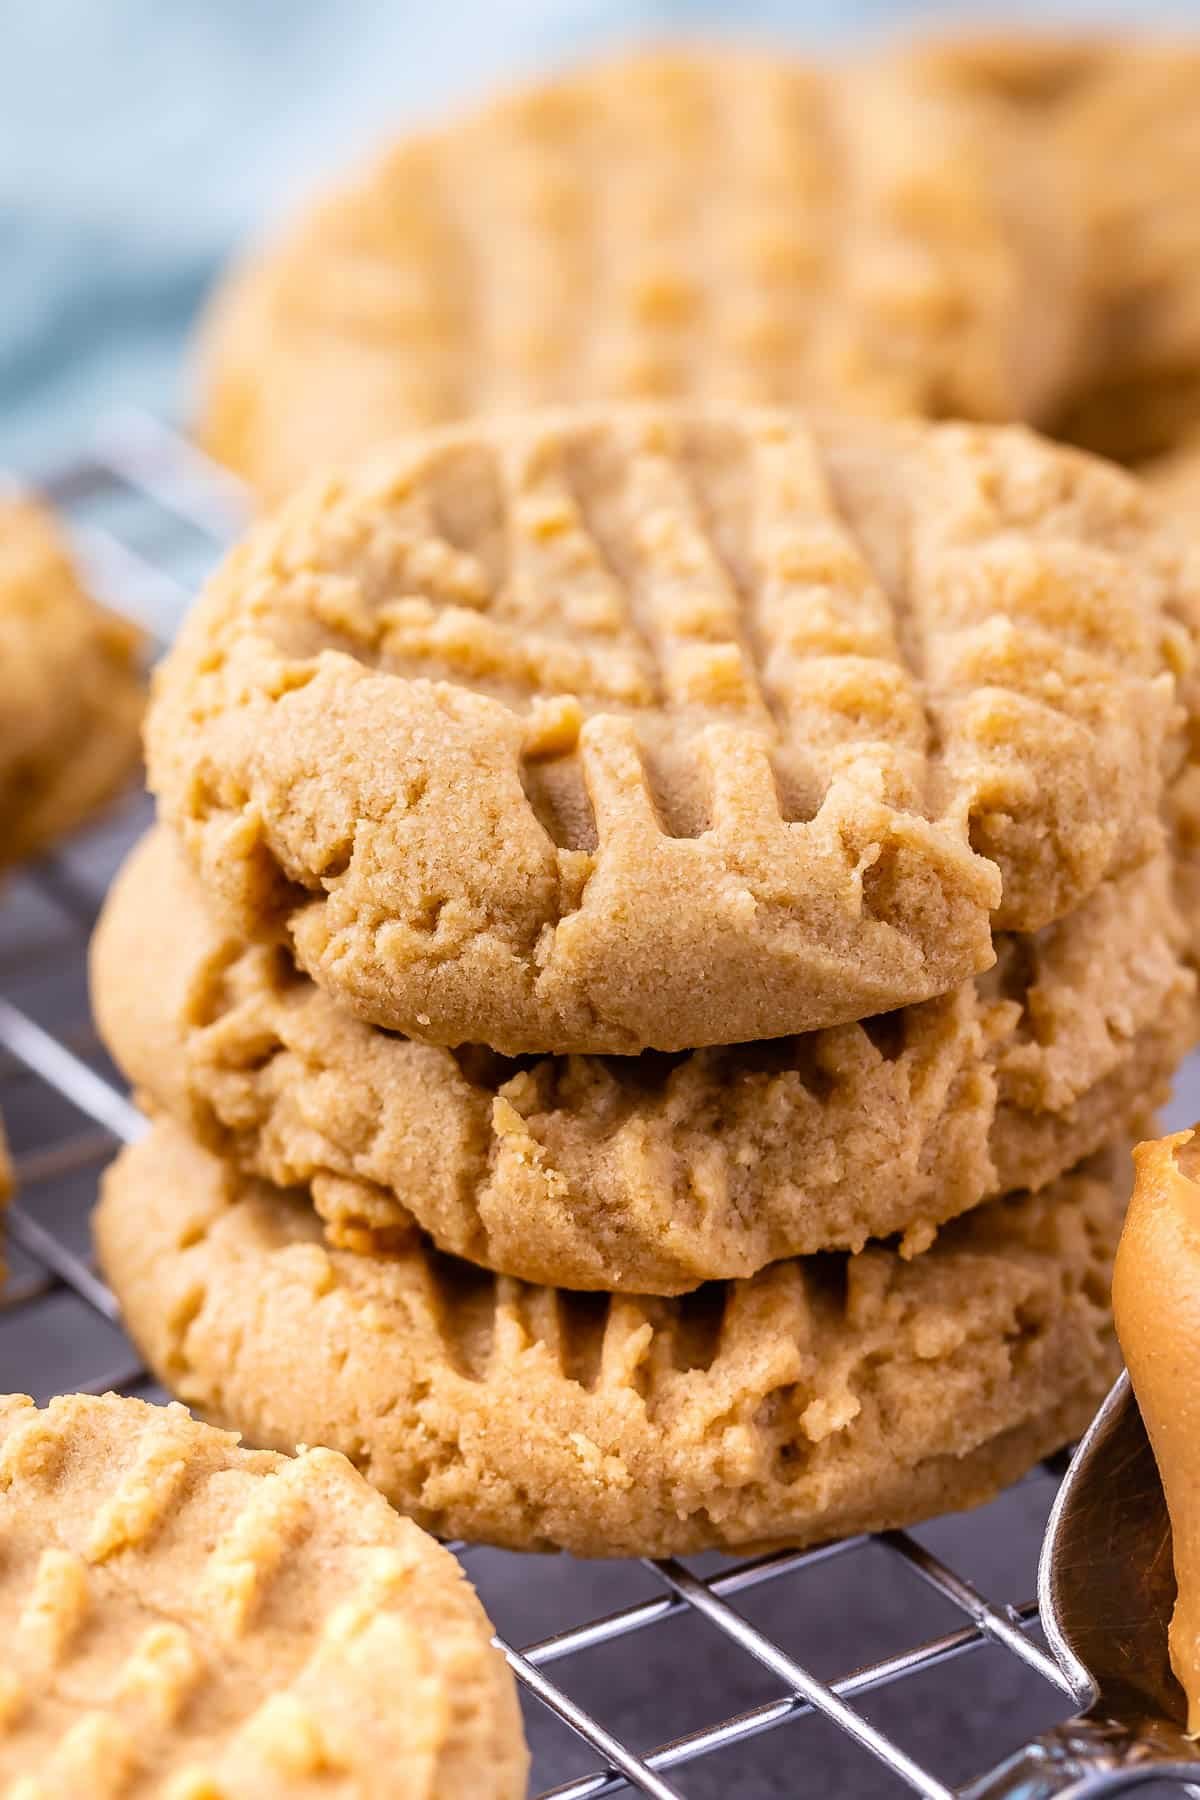 The Hands-Down Best Peanut Butter Cookie Recipe